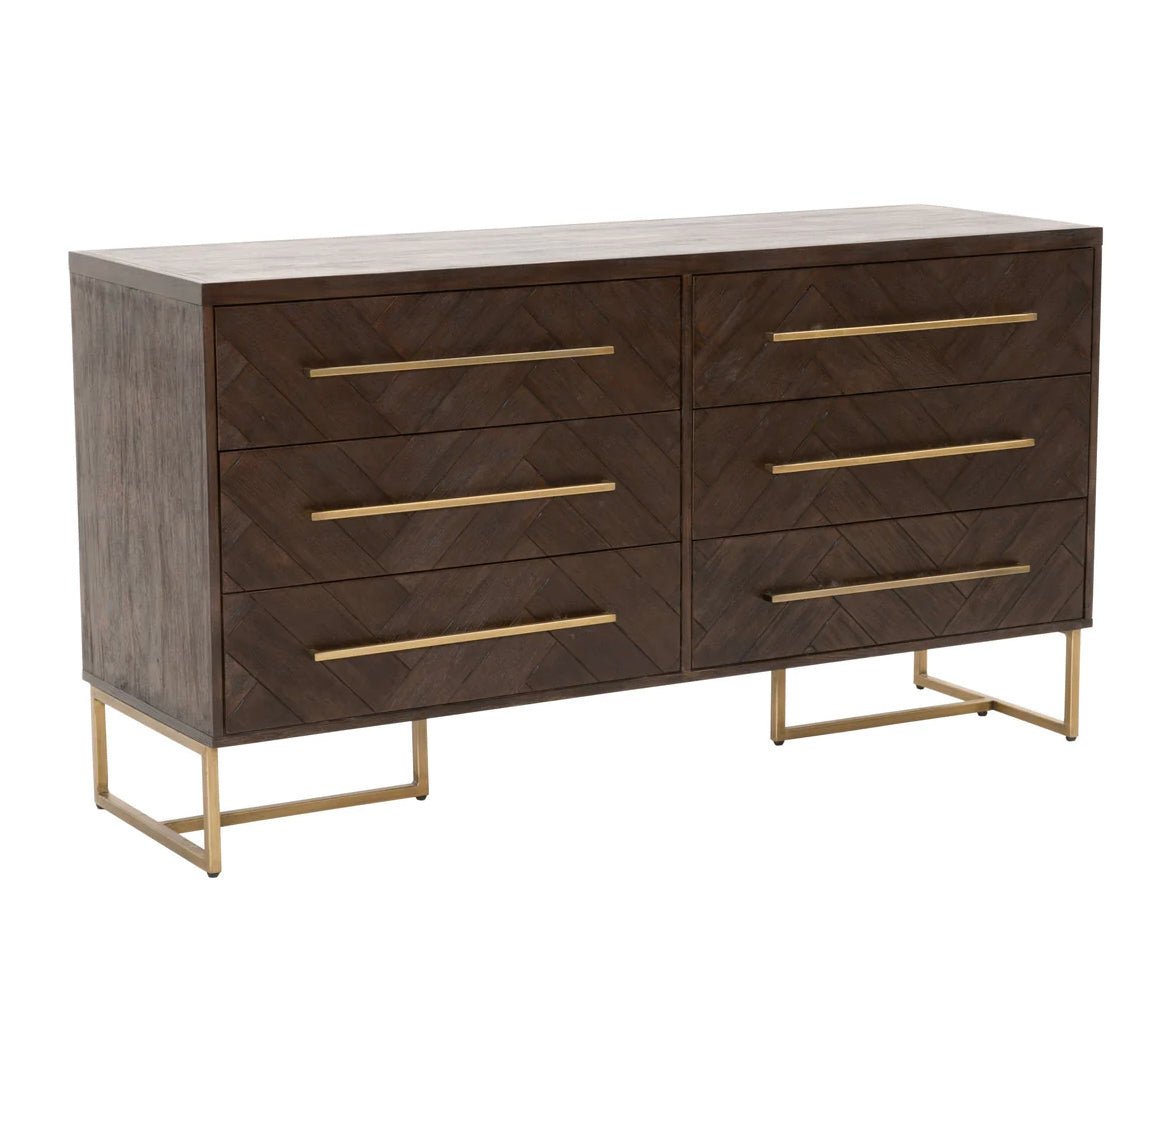 ‘Mosaic’ 6-Drawer Double Dresser (Rustic Java) - EcoLuxe Furnishings